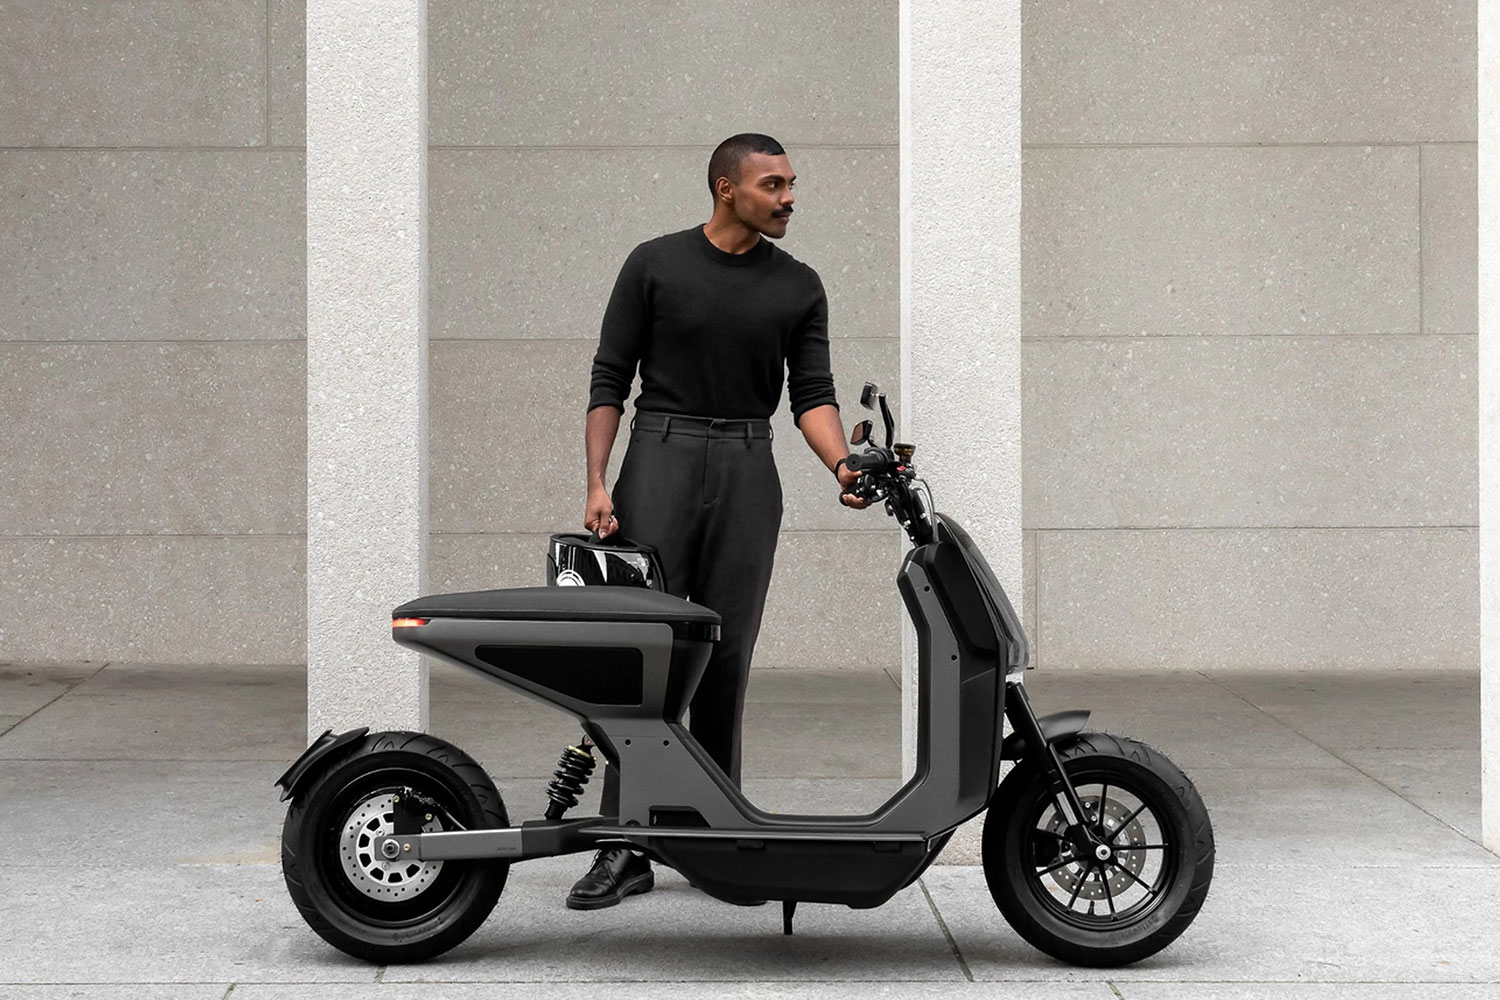 NAON Zero-One offers styling and to 100km/h top